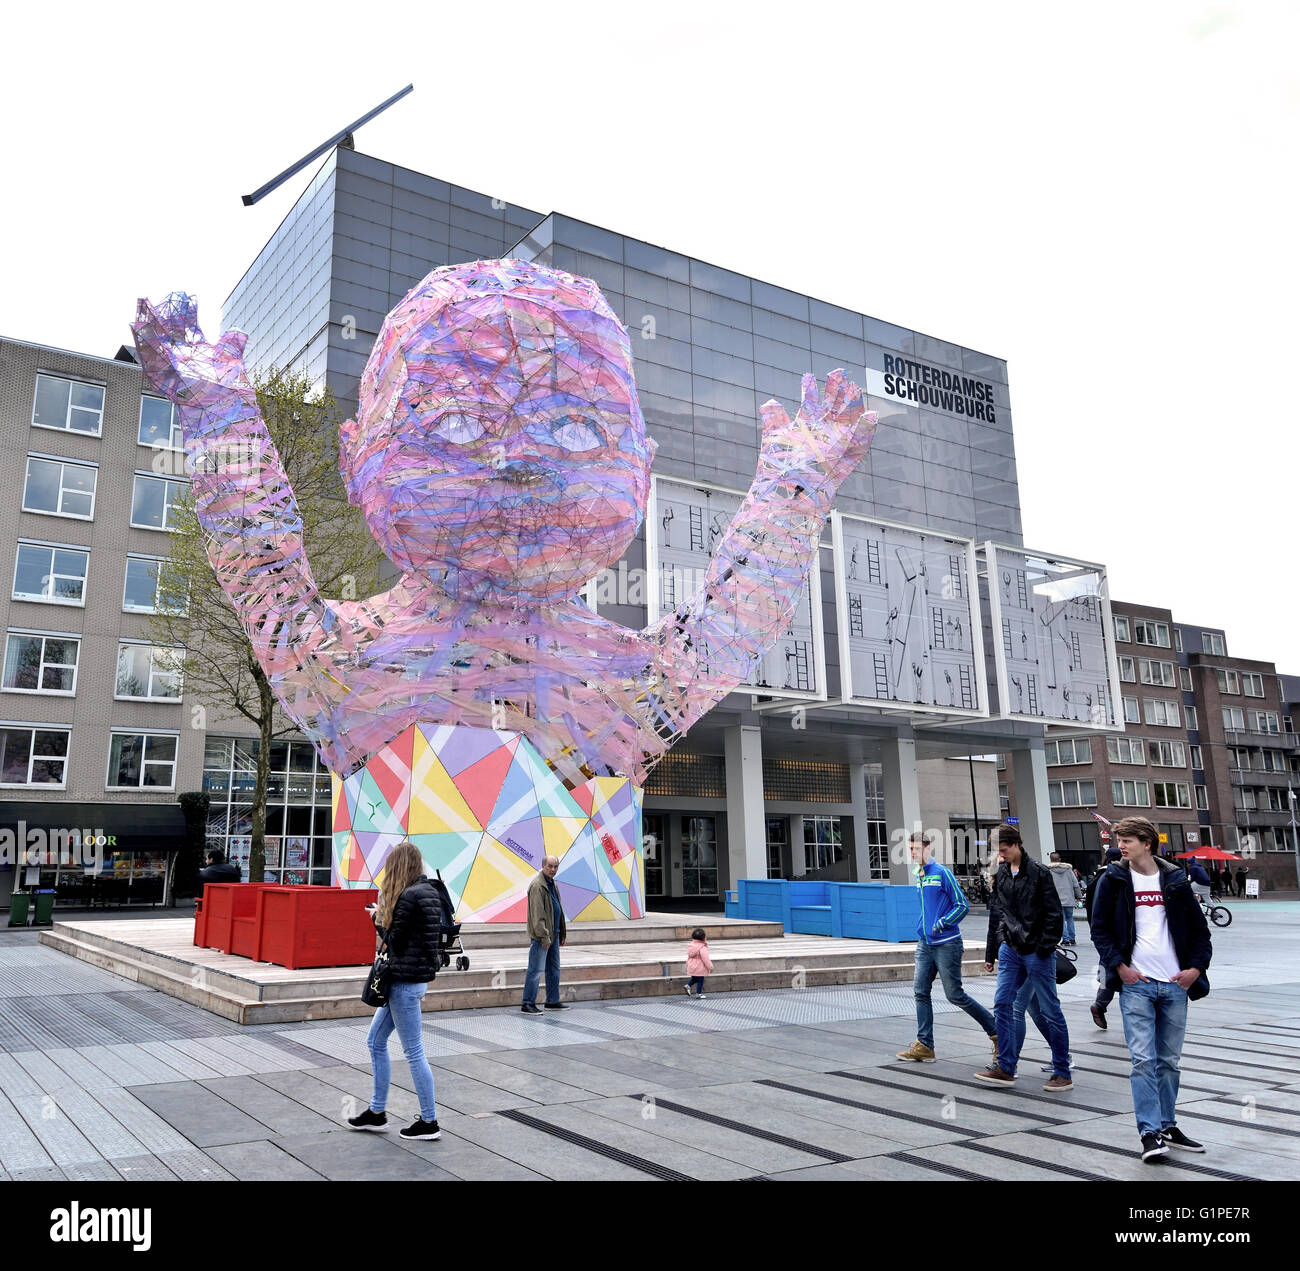 Rotterdamse Schouwburg Theater Square ( Schouwburgplein) situated in the  heart of the city of Rotterdam, and is flanked by the municipal theater,  concert hall, restaurants, and cafes Stock Photo - Alamy